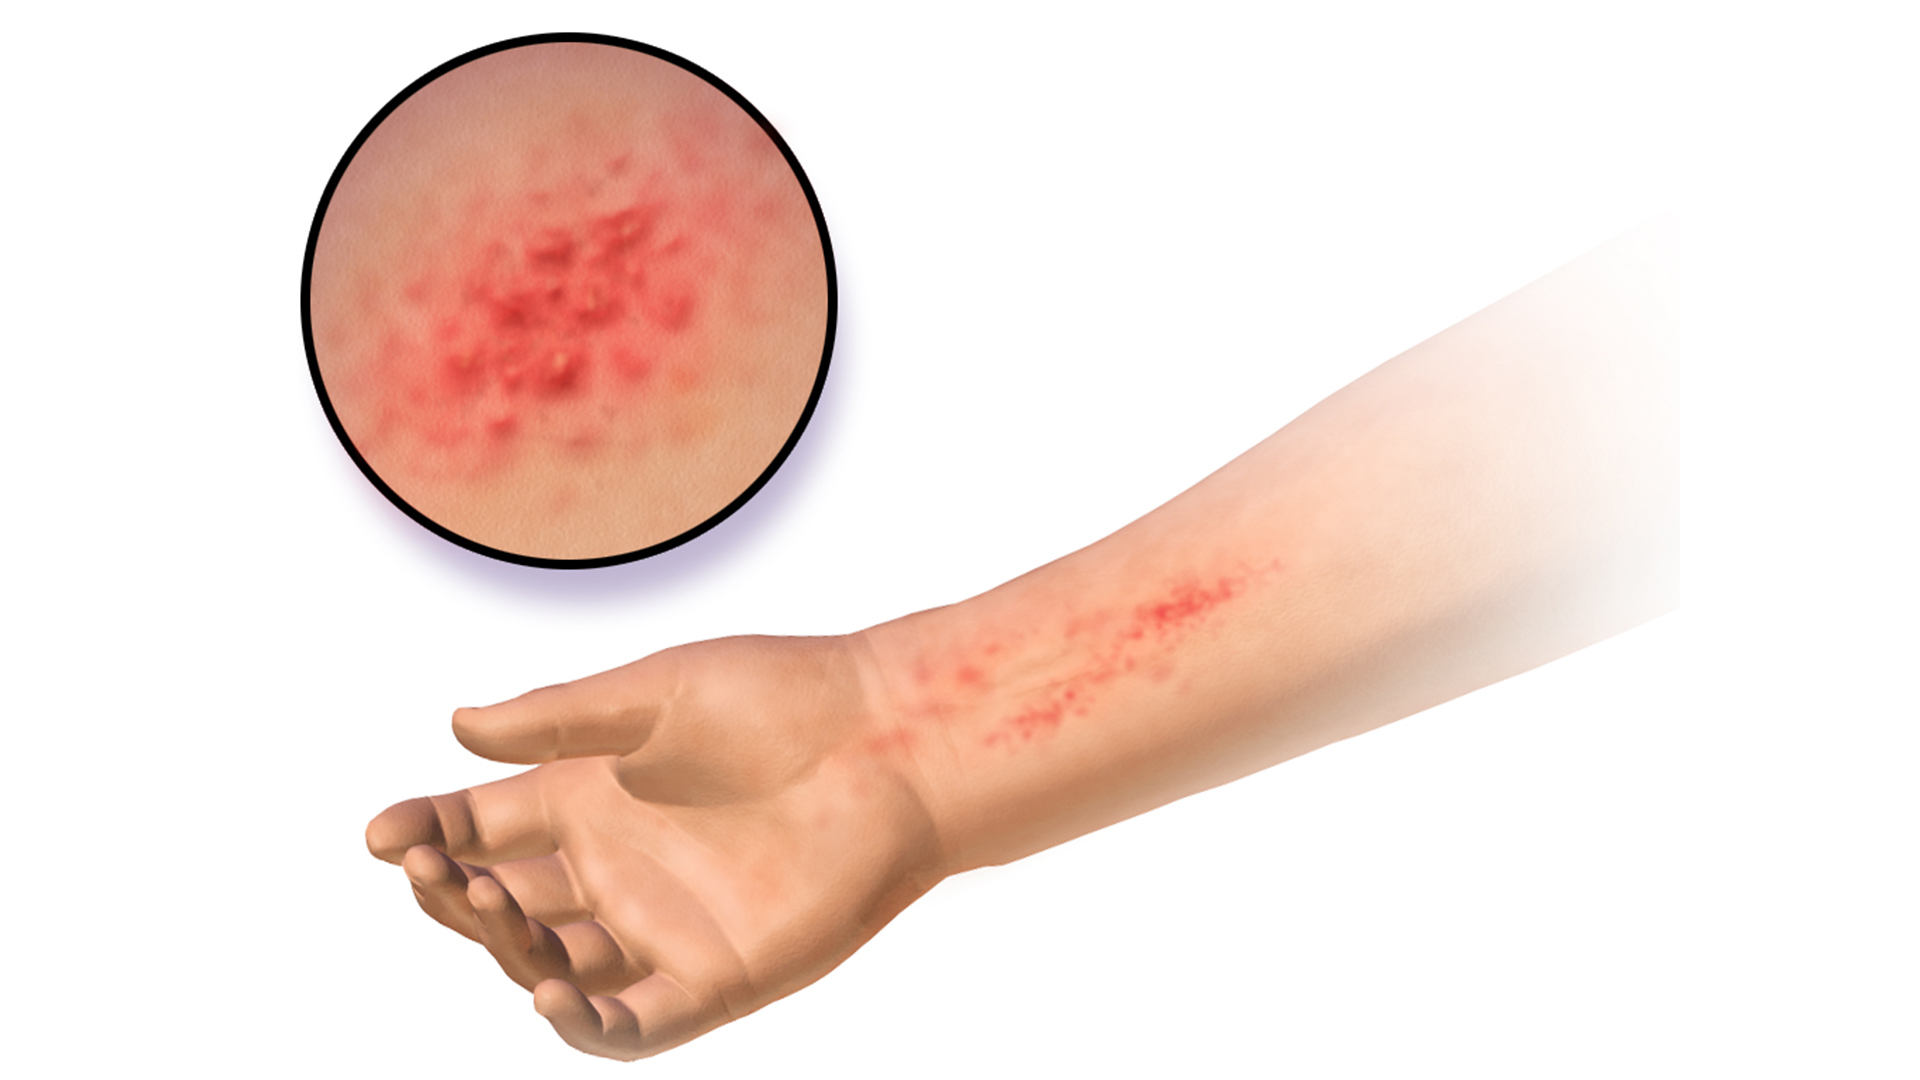 This is an example of how a contact-dermatitis rash can look on pale skin, but note that the resulting rash can vary depending on how severely the skin has been compromised. (Image credit: Blausen Medical)